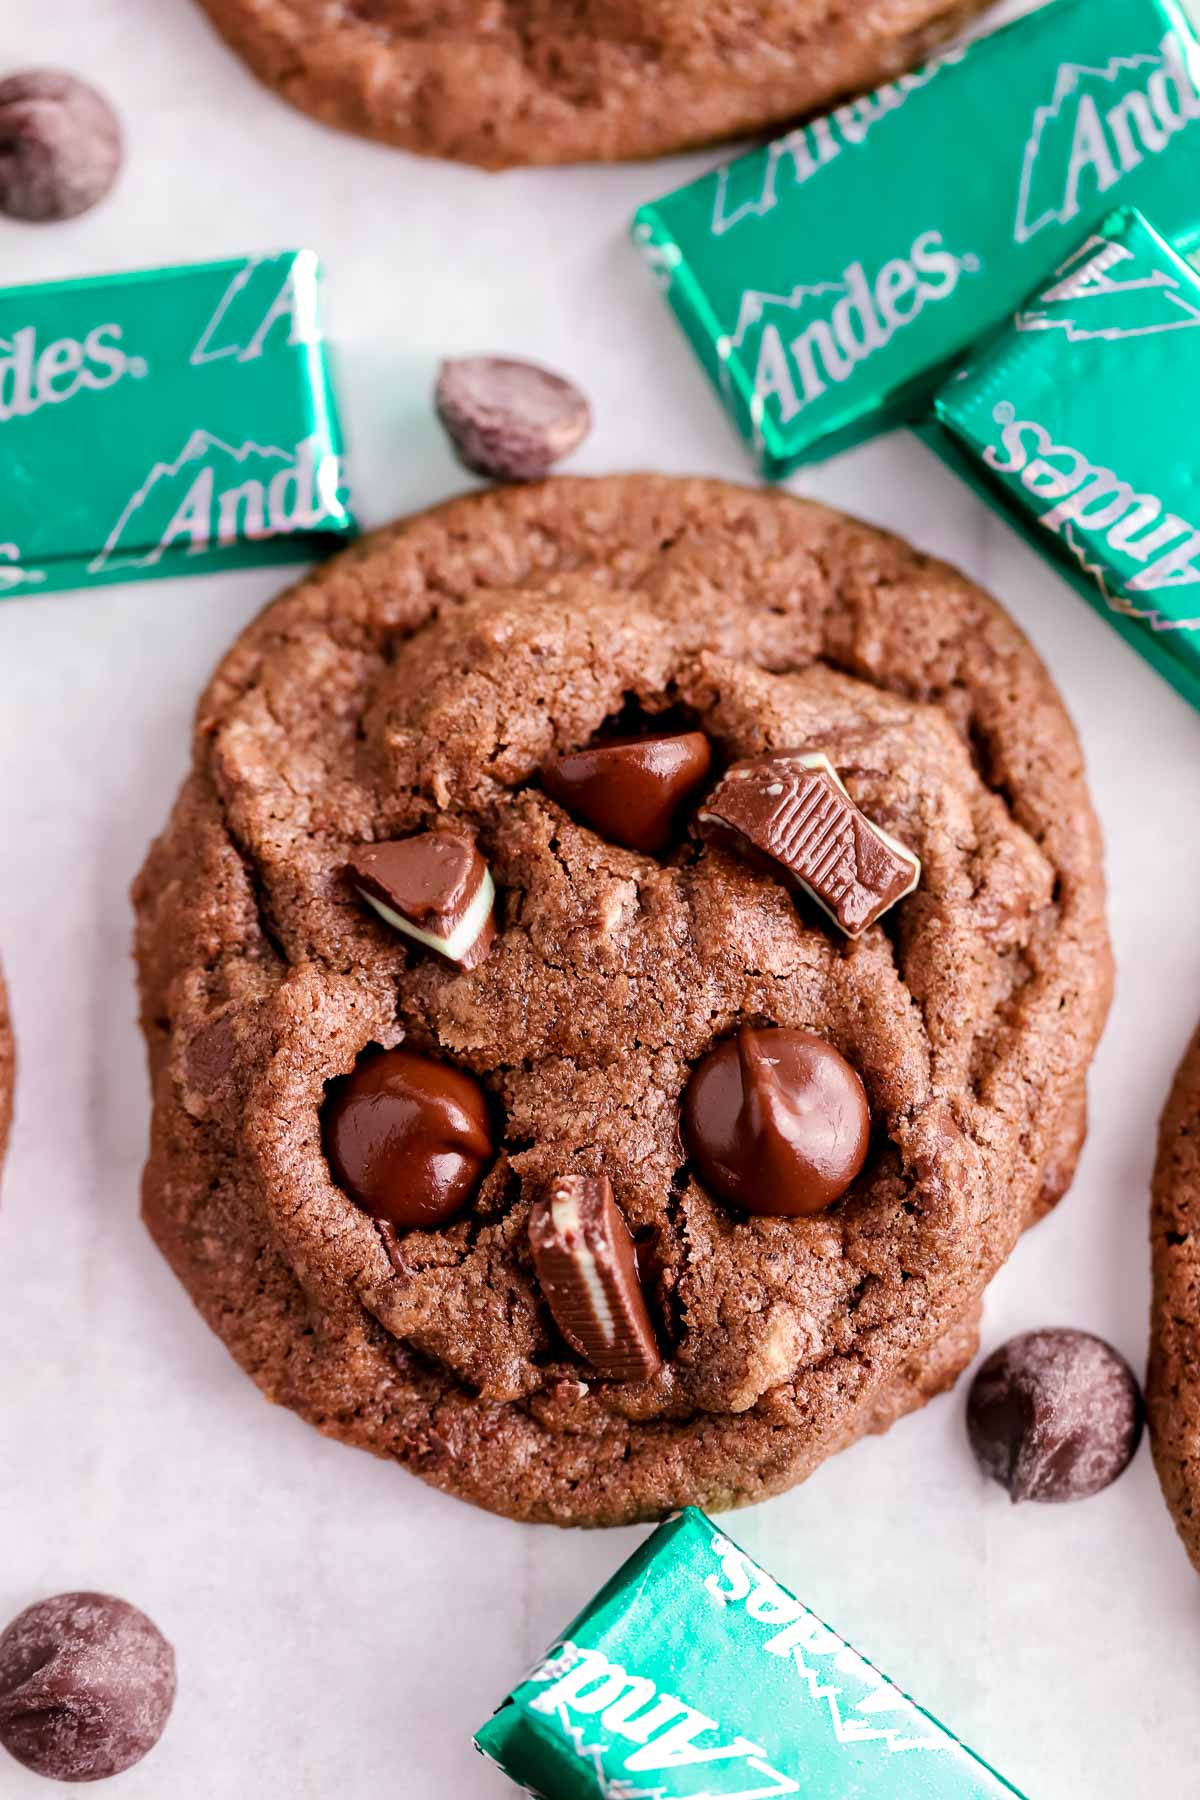 Andes mint chocolate cookie surrounded by Andes mints